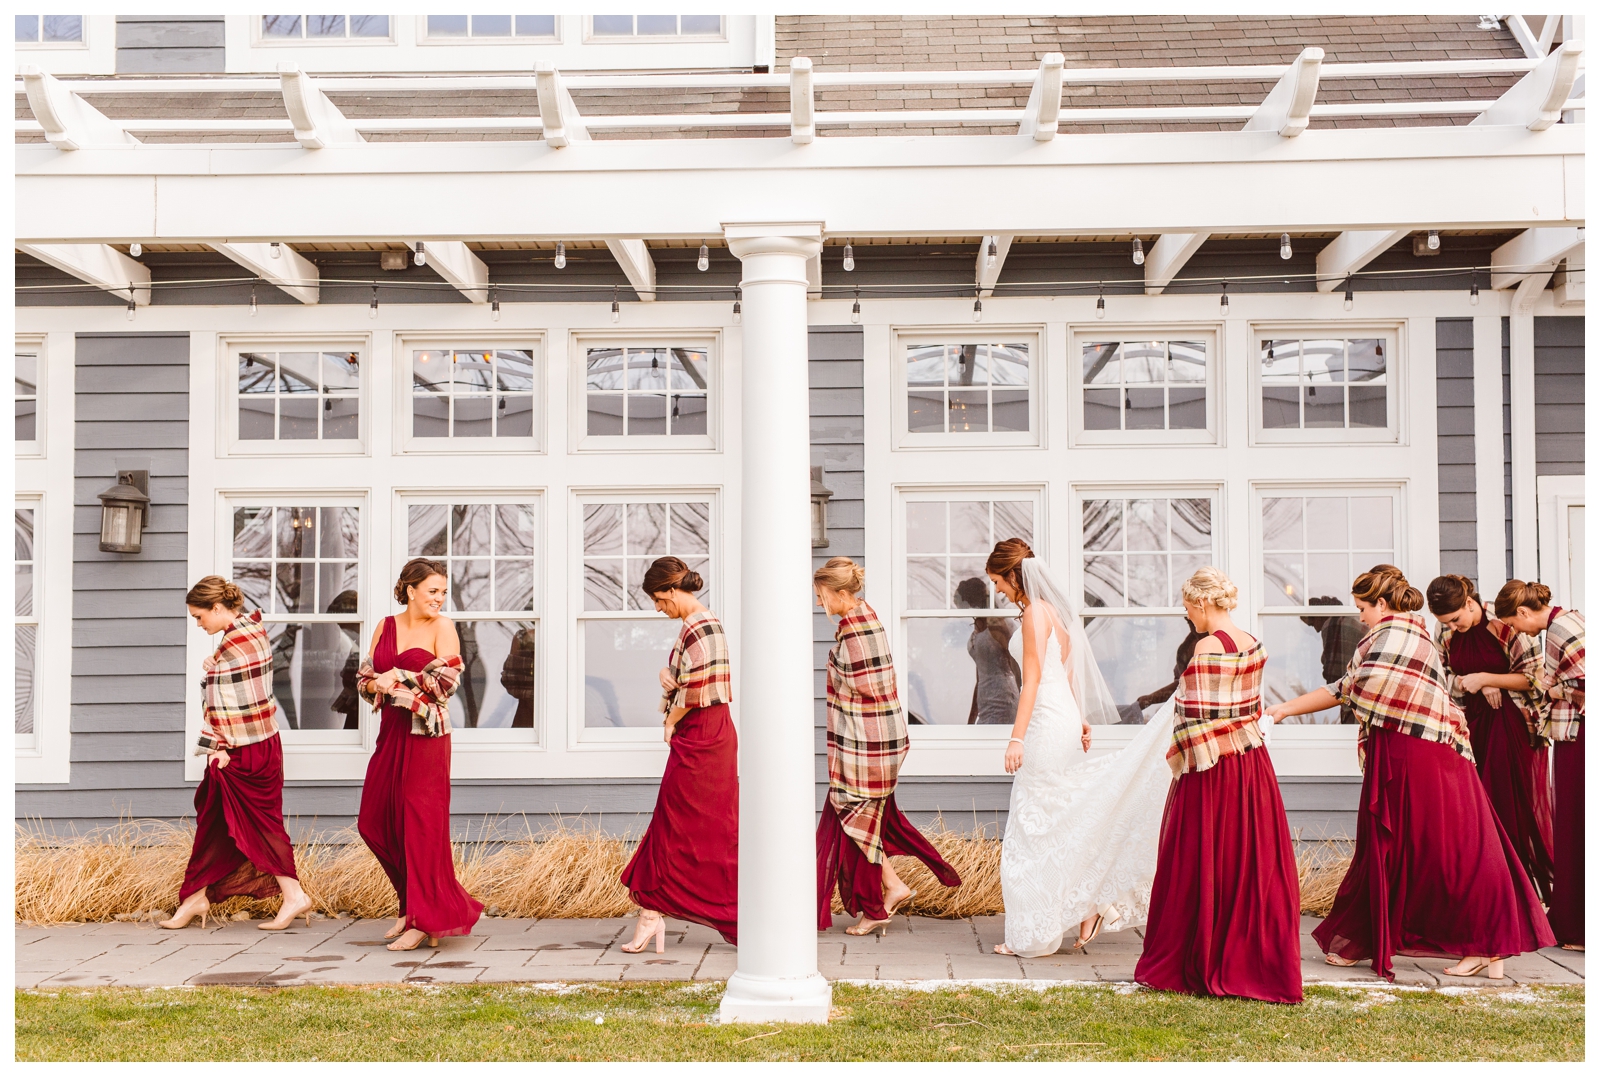 Romantic Snowy Wedding Day Inspiration at The Chesapeake Bay Beach Club - Brooke Michelle Photography